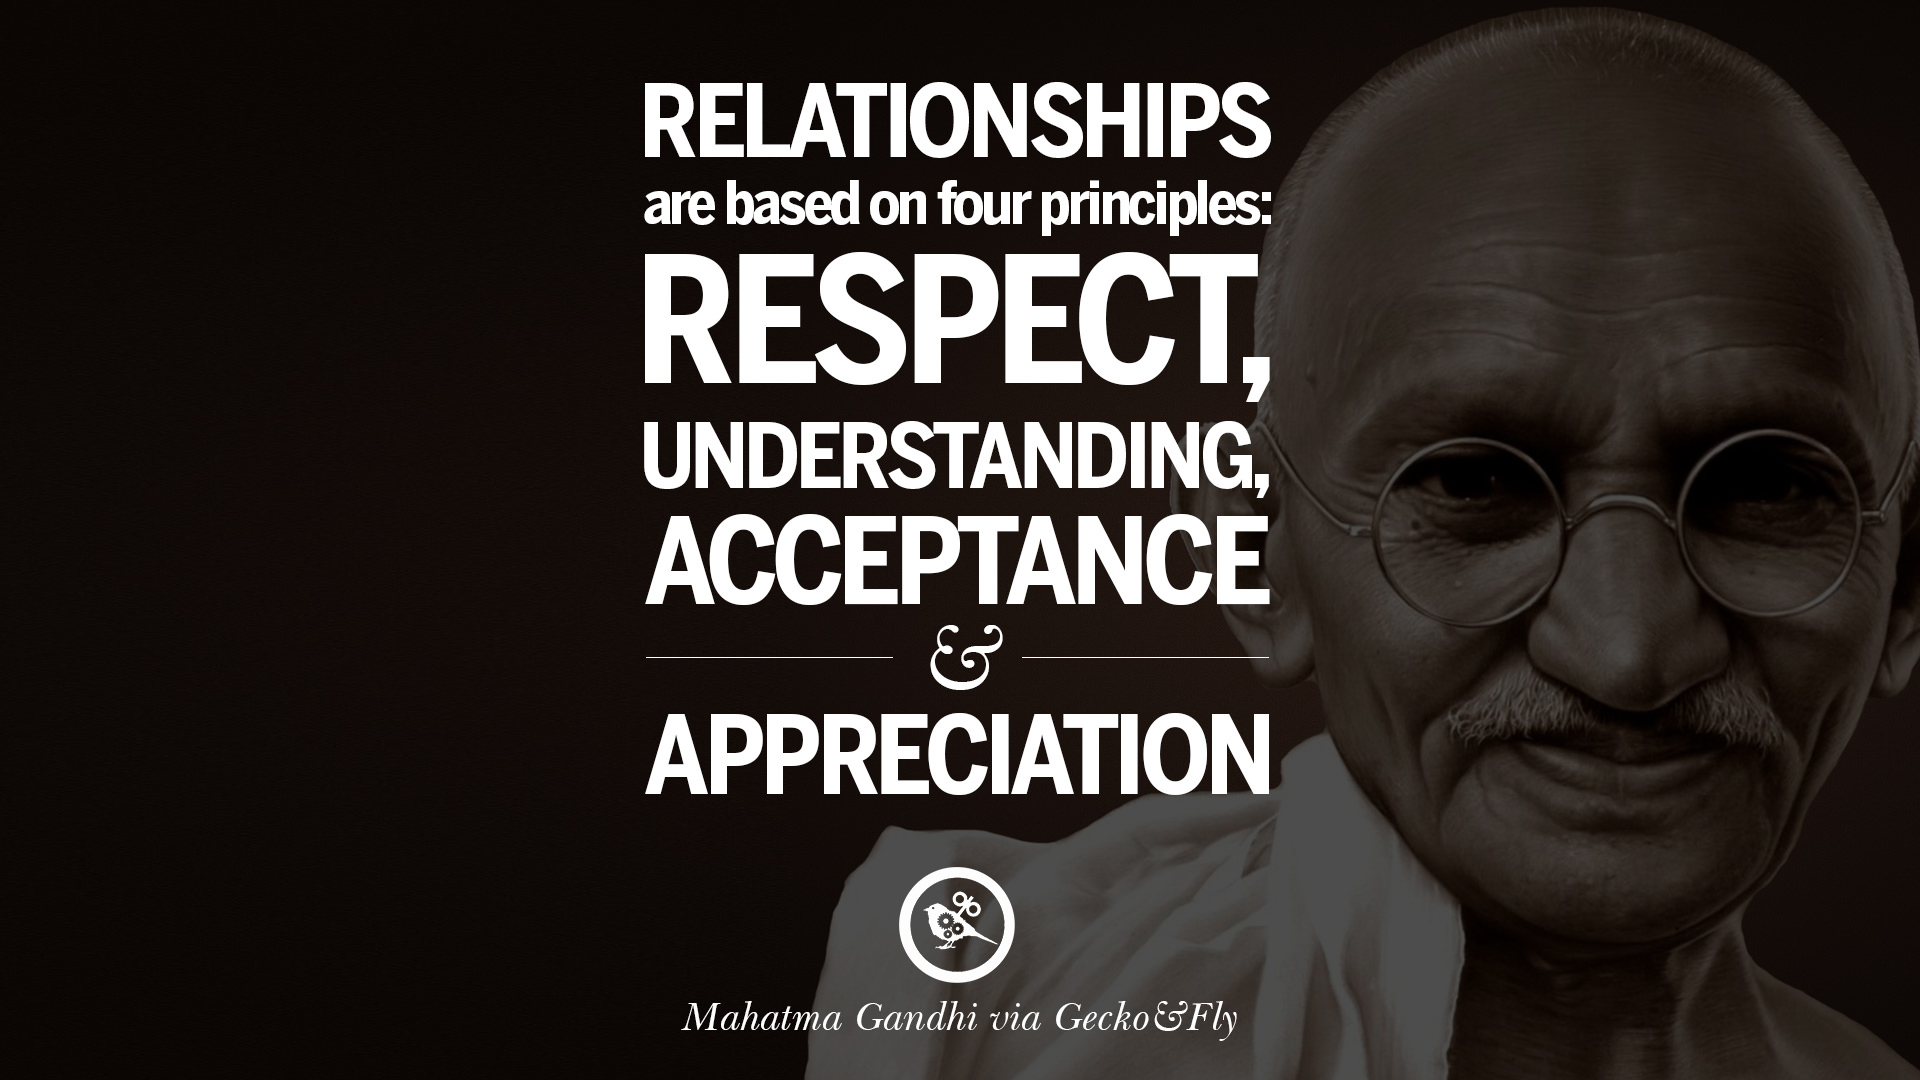 28 Mahatma Gandhi Quotes And Frases On Peace, Protest, And Civil Liberties-6542